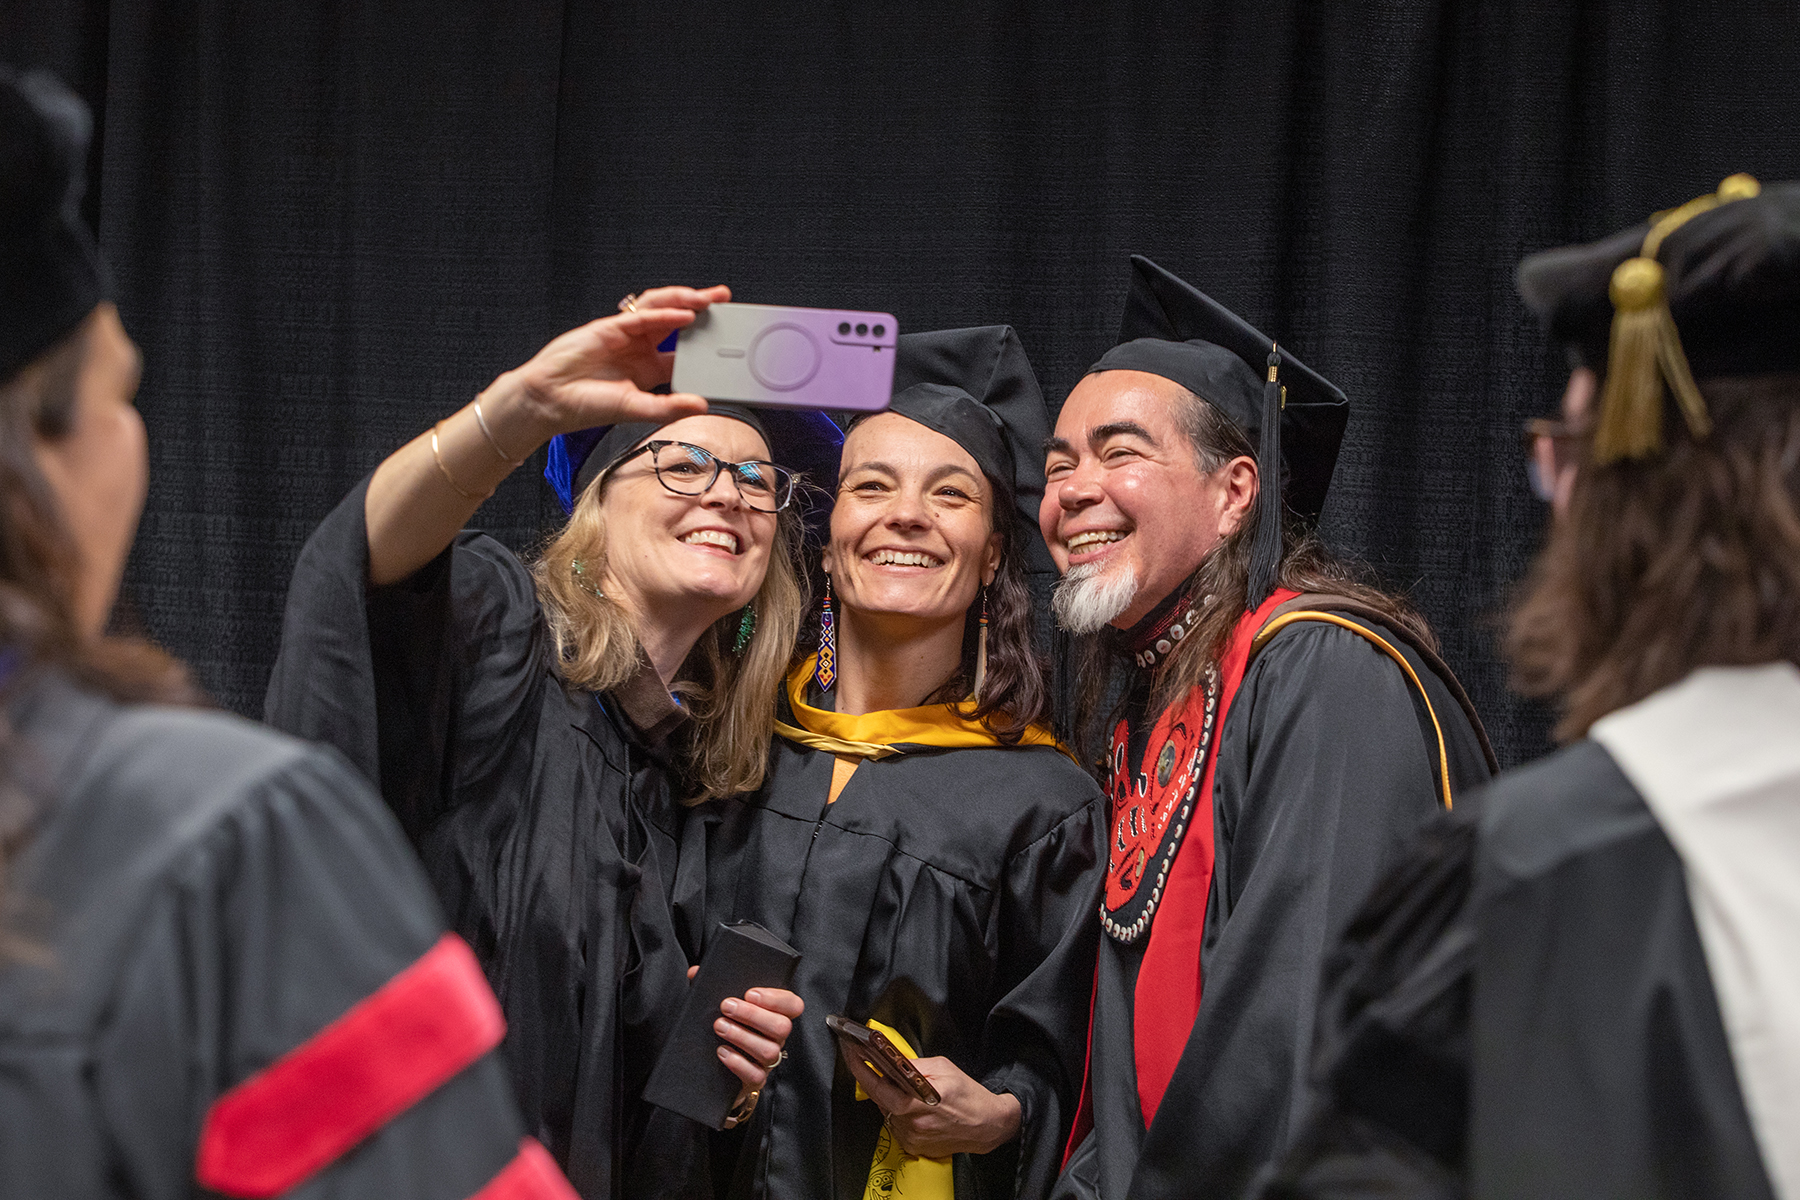 (from left) Carrie Baker, Professor and Associate Dean, College of Liberal Arts, Dept. of Theatre and Film, Maya Salganek, Director of FRAME and Associate Professor, Film/Video Arts, and Da-ka-xeen Mehner, Professor of Native Art and Department Chair, take a photo before the faculty processional during the University of Alaska Fairbanks 2023 Commencement Ceremony at the Carlson Center Saturday, May 6, 2023. | UAF Photo by Eric Engman